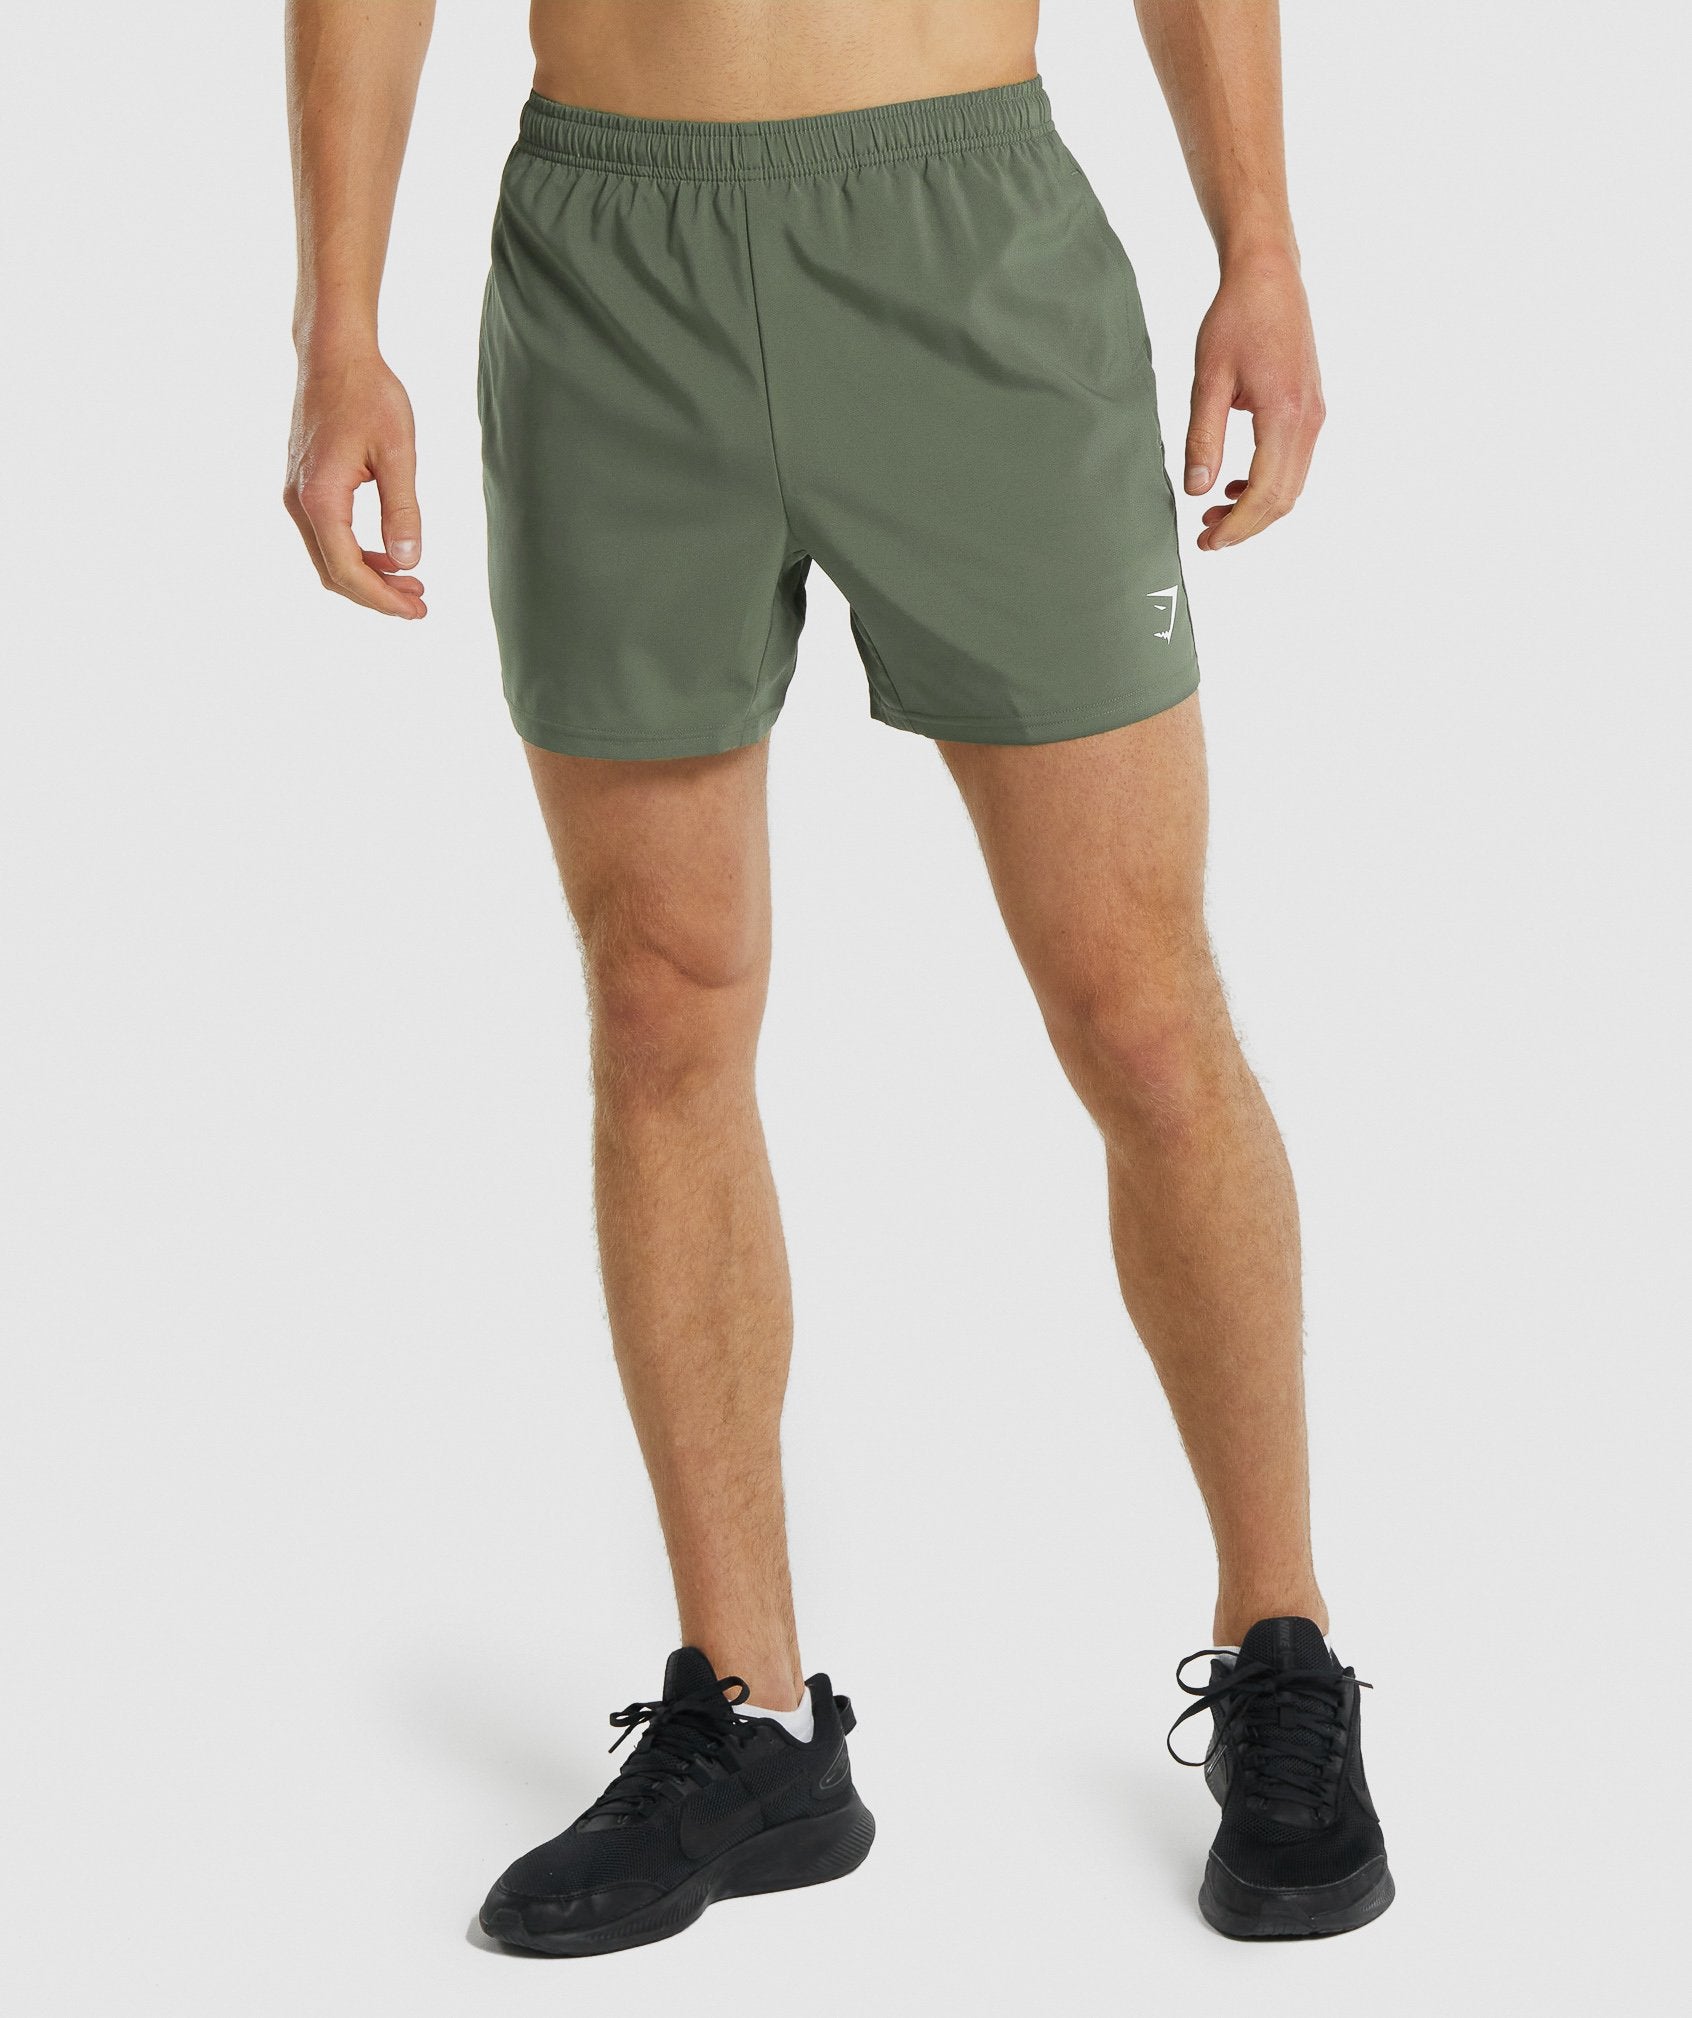 Arrival 5" Shorts in Green - view 1